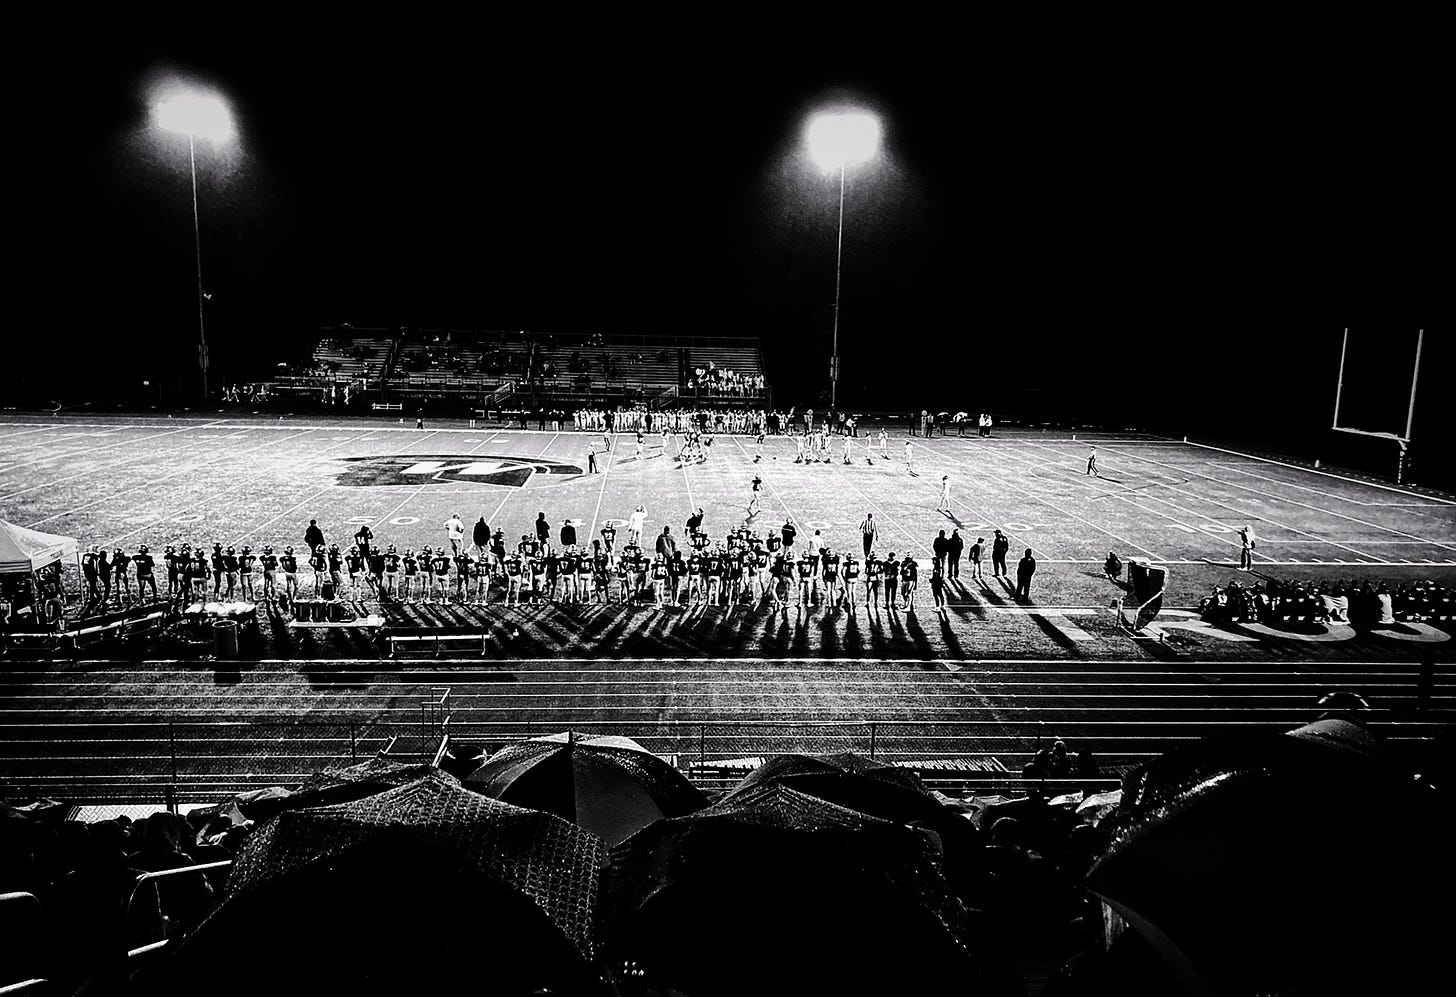 A photograph of a rainy Friday night high school American football game taken from the top row of the stadium.